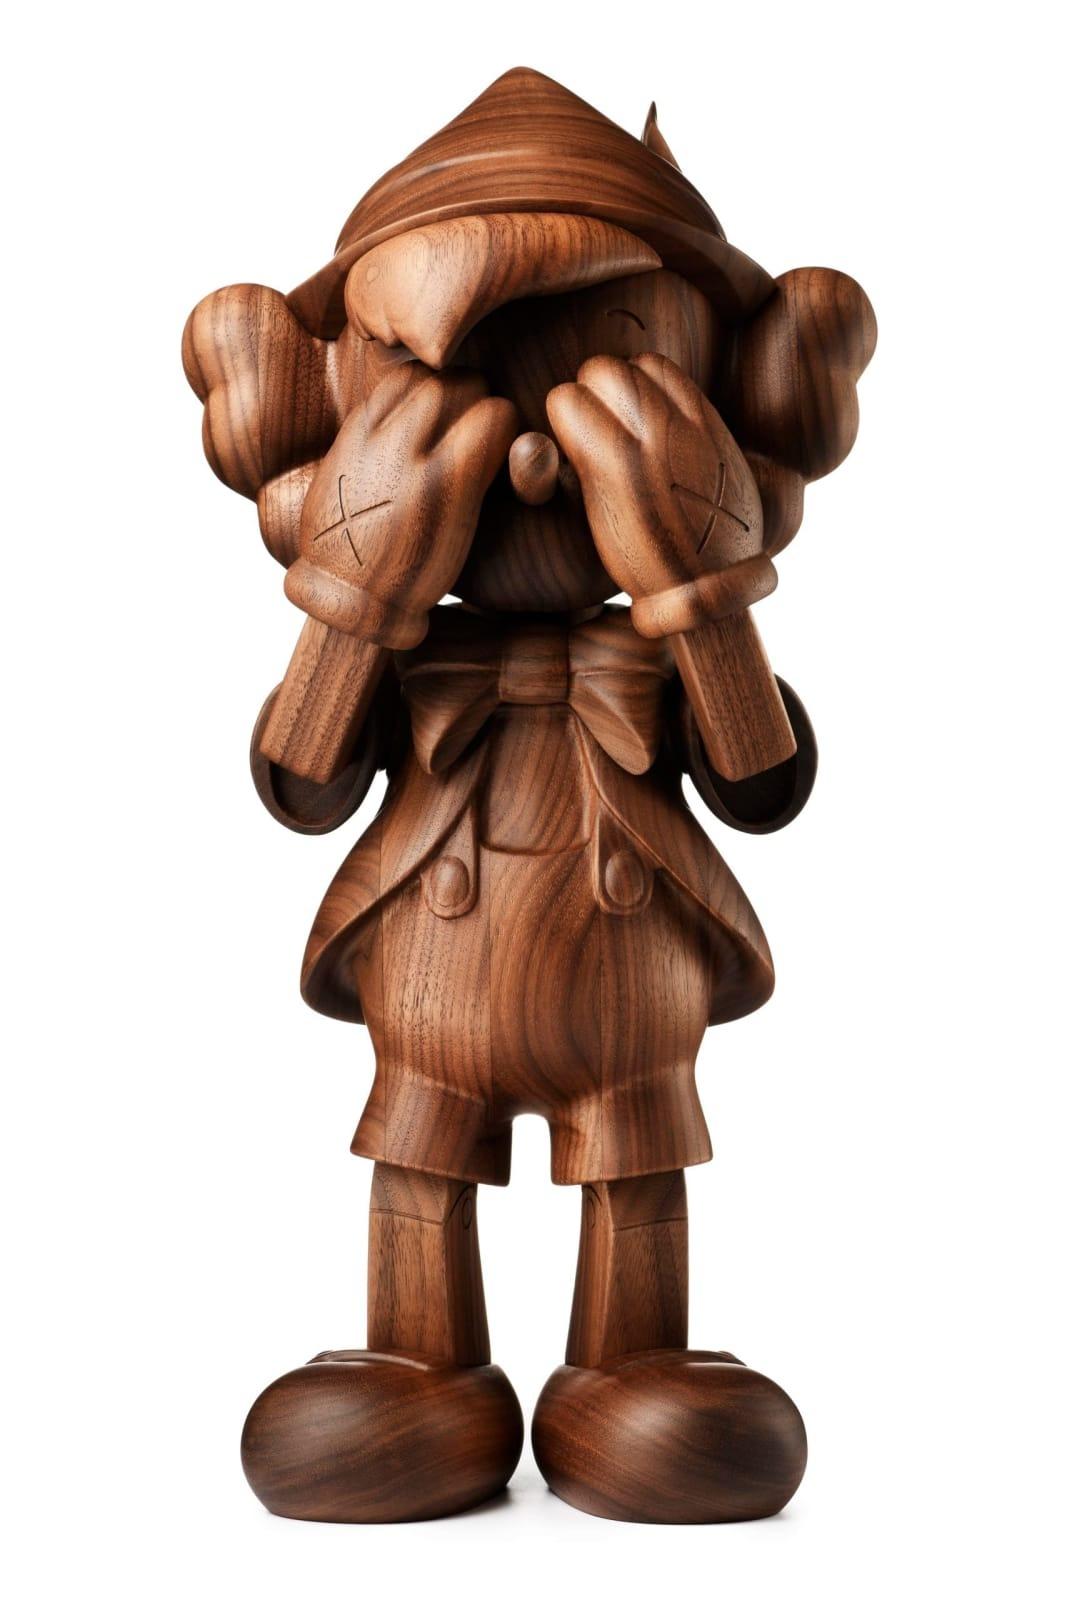 How does KAWS make his sculptures?